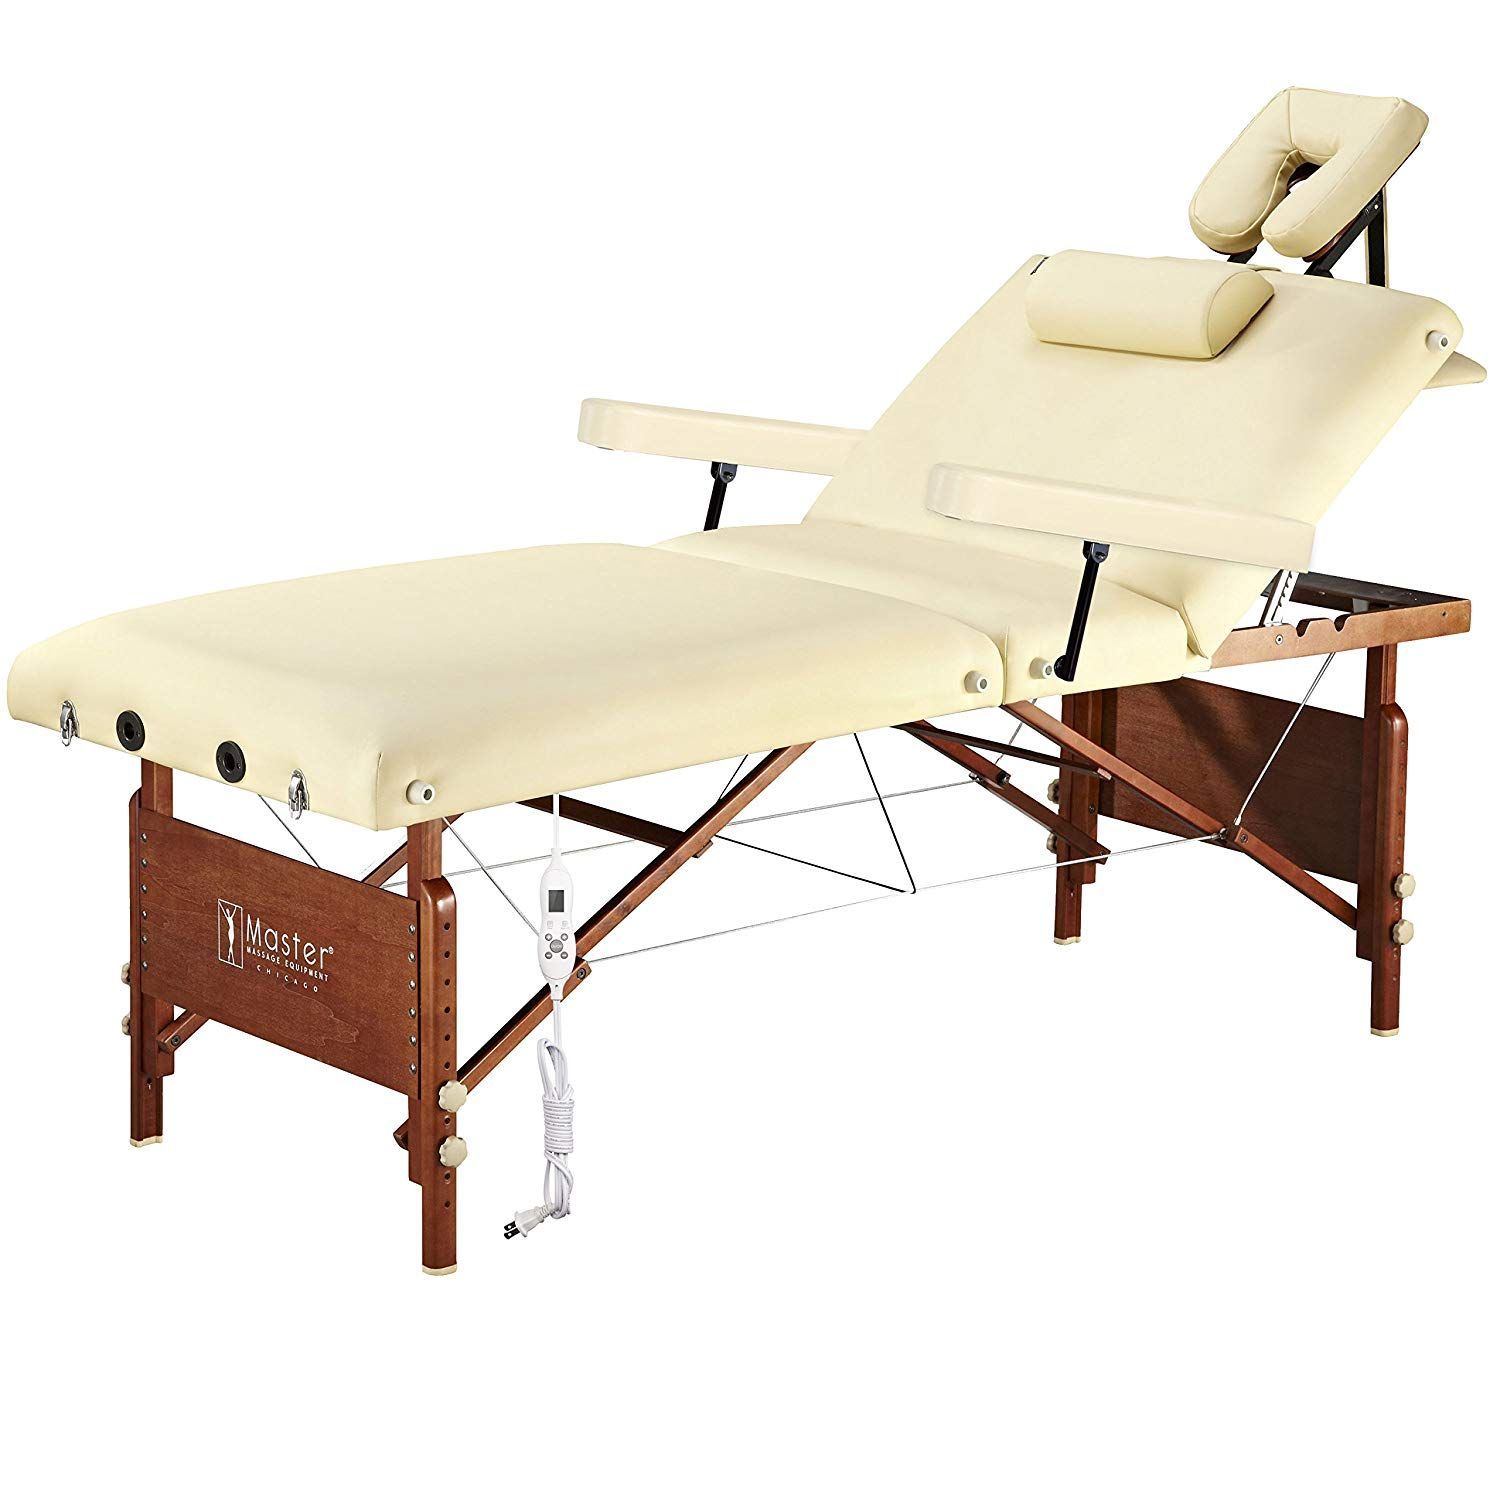 Massage table sexual position image photo